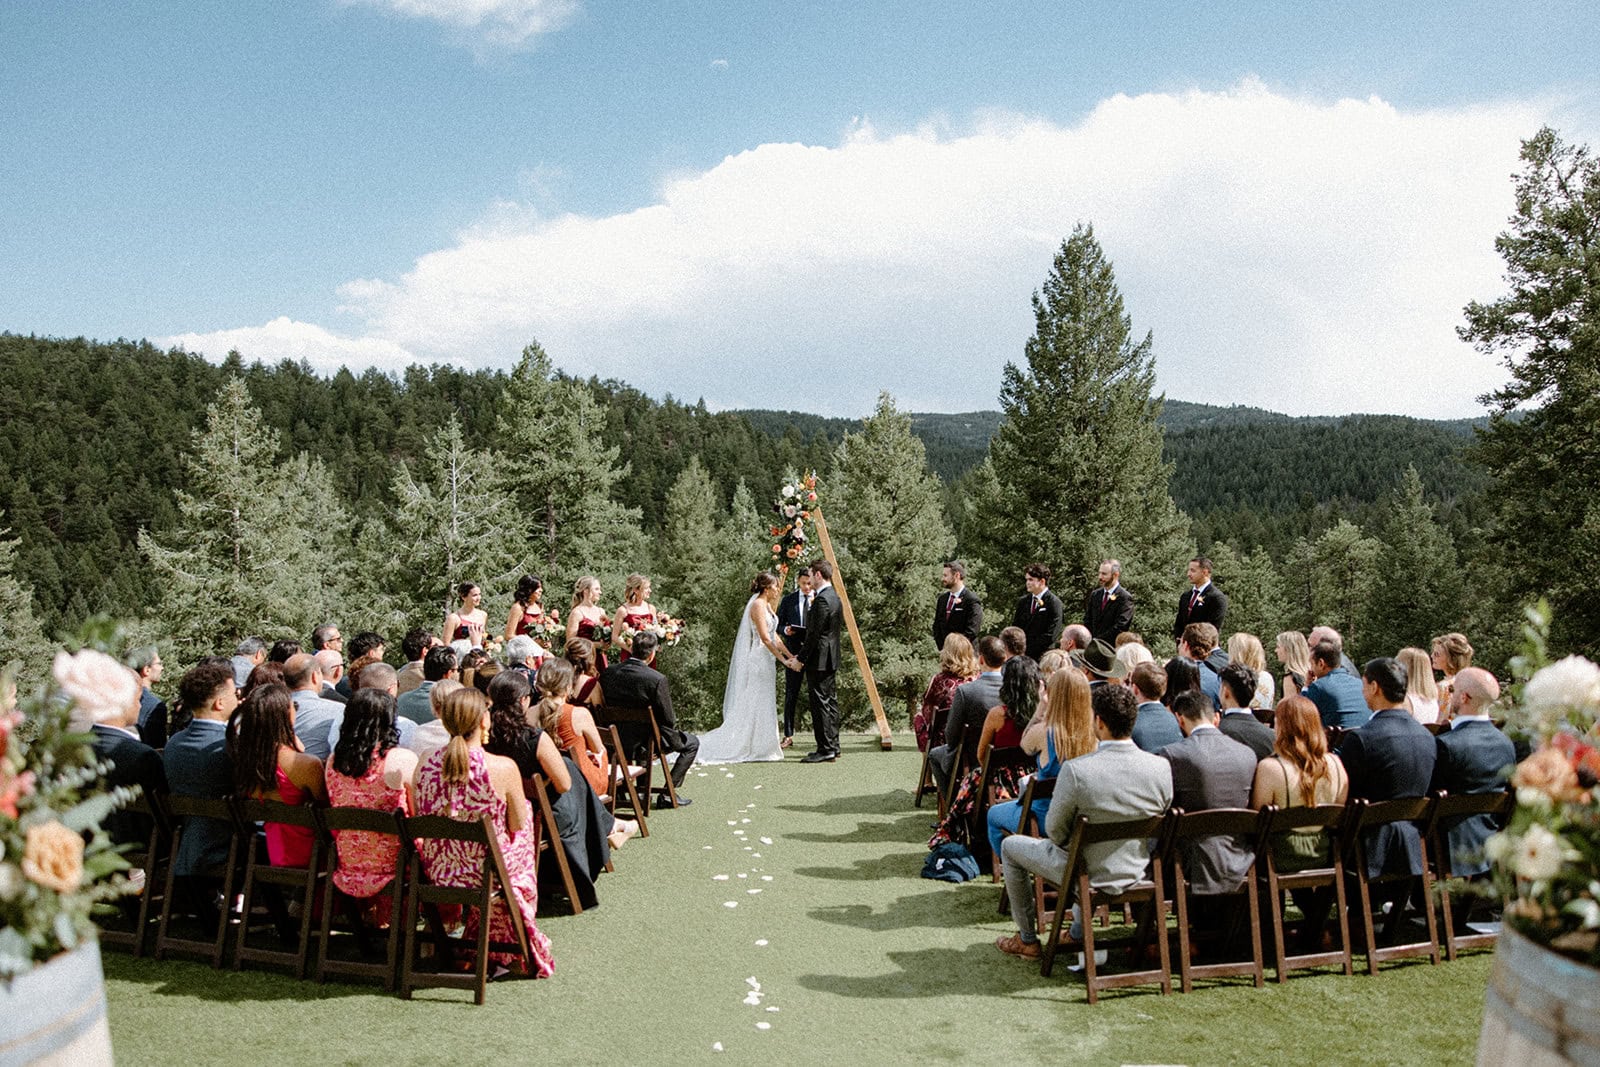 Woodlands Colorado is one of the best Colorado wedding venues near Denver. In this photo, a couple is sharing their vows in front of their friends and family during the ceremony.